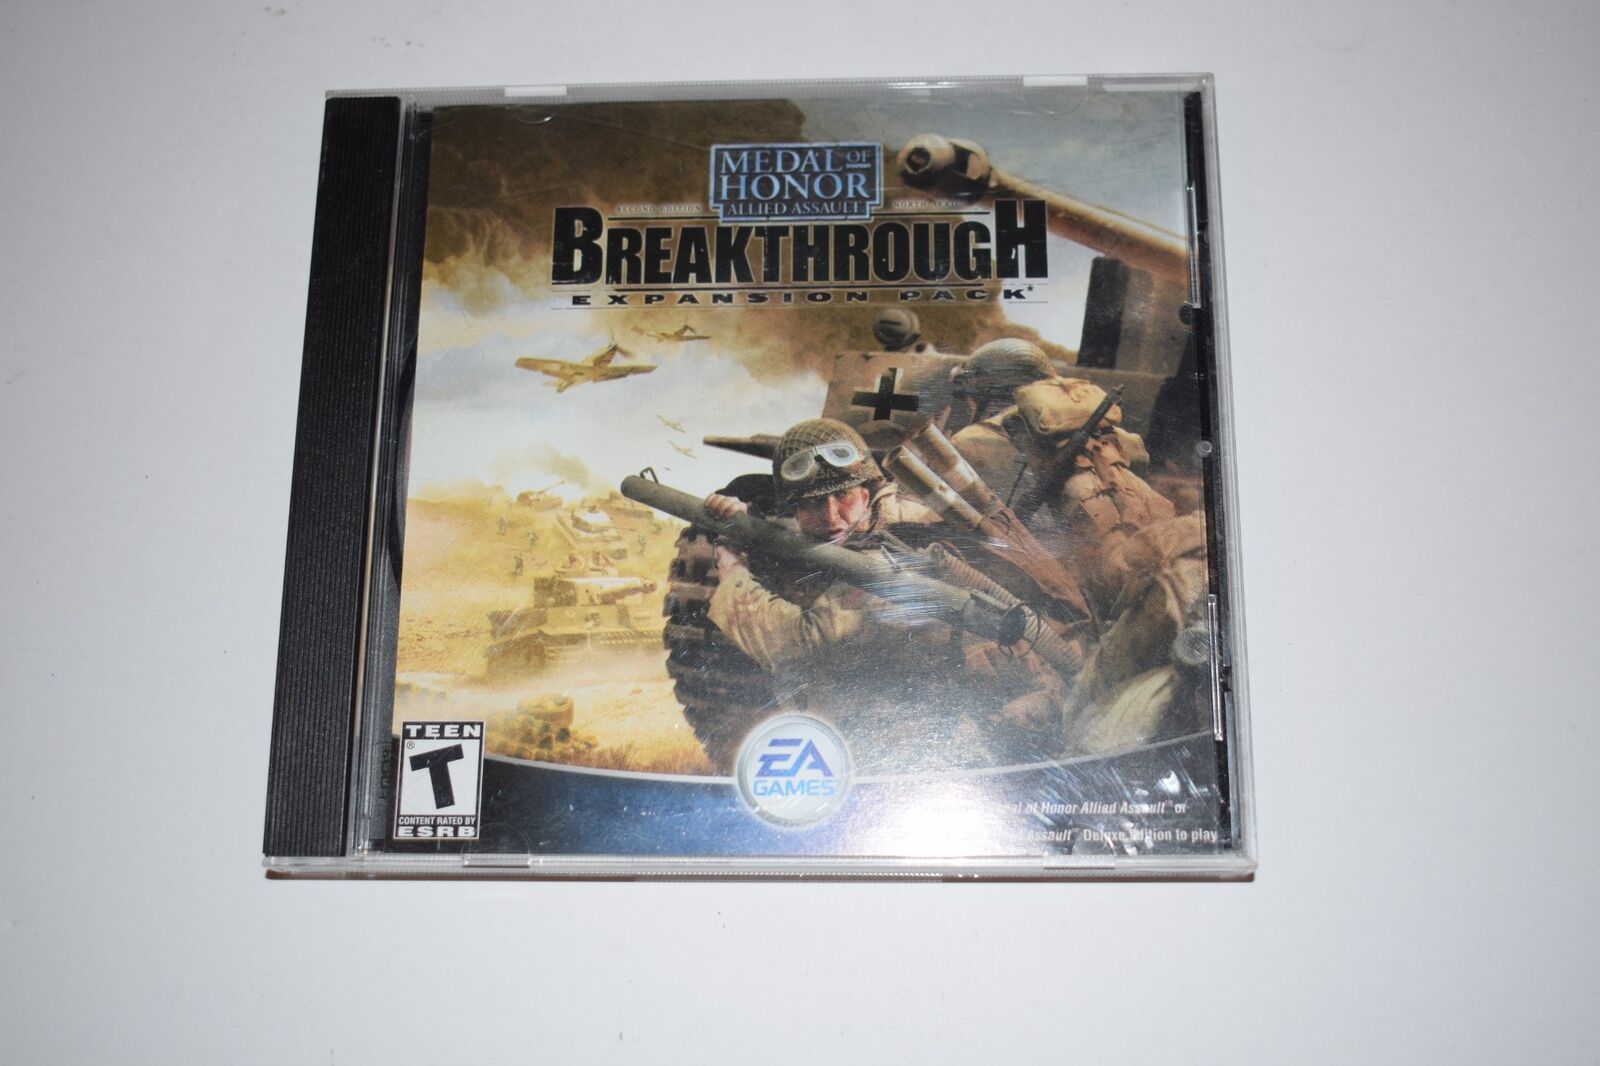 Medal of Honor: Allied Assault -- Breakthrough Expansion Pack  PC Game  (MVY55)